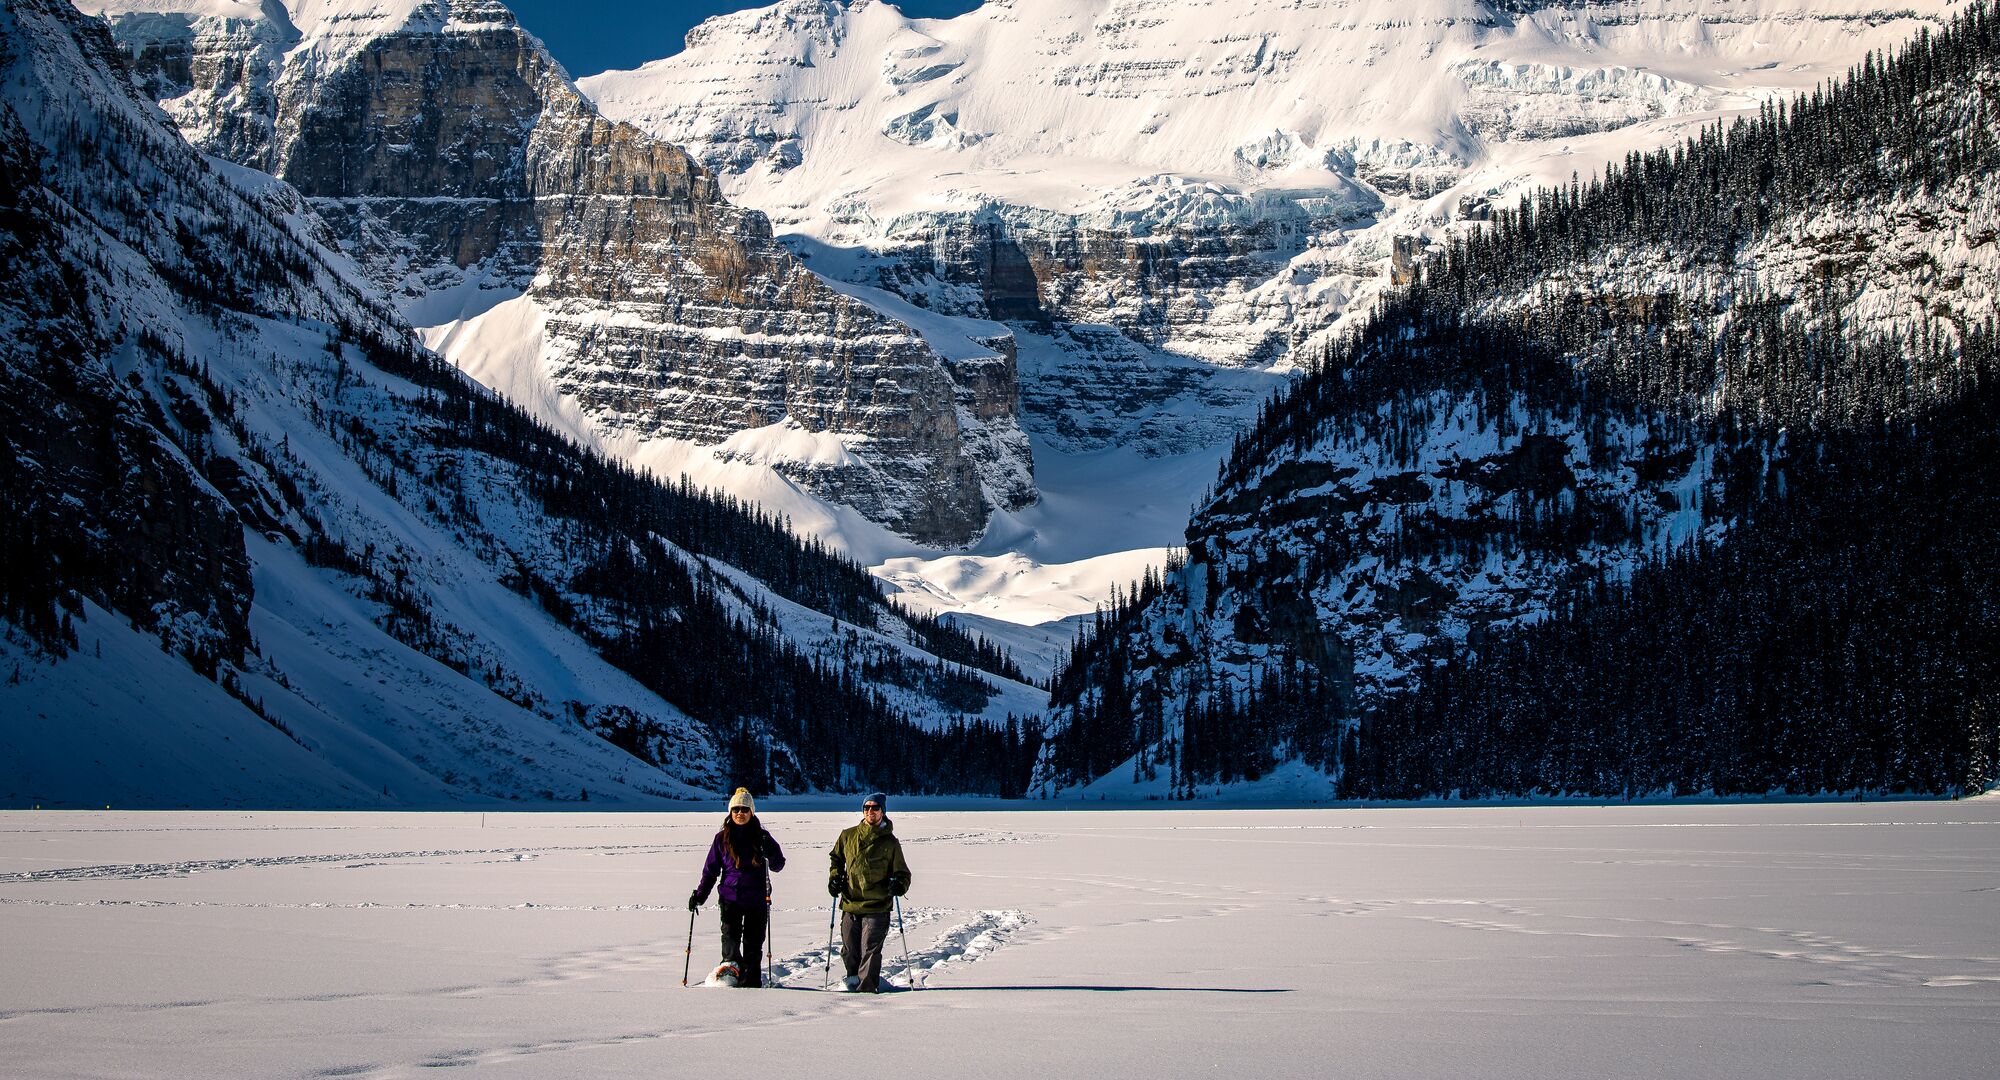 Two people walk on snowshoes on Lake Louise in Banff National Park.